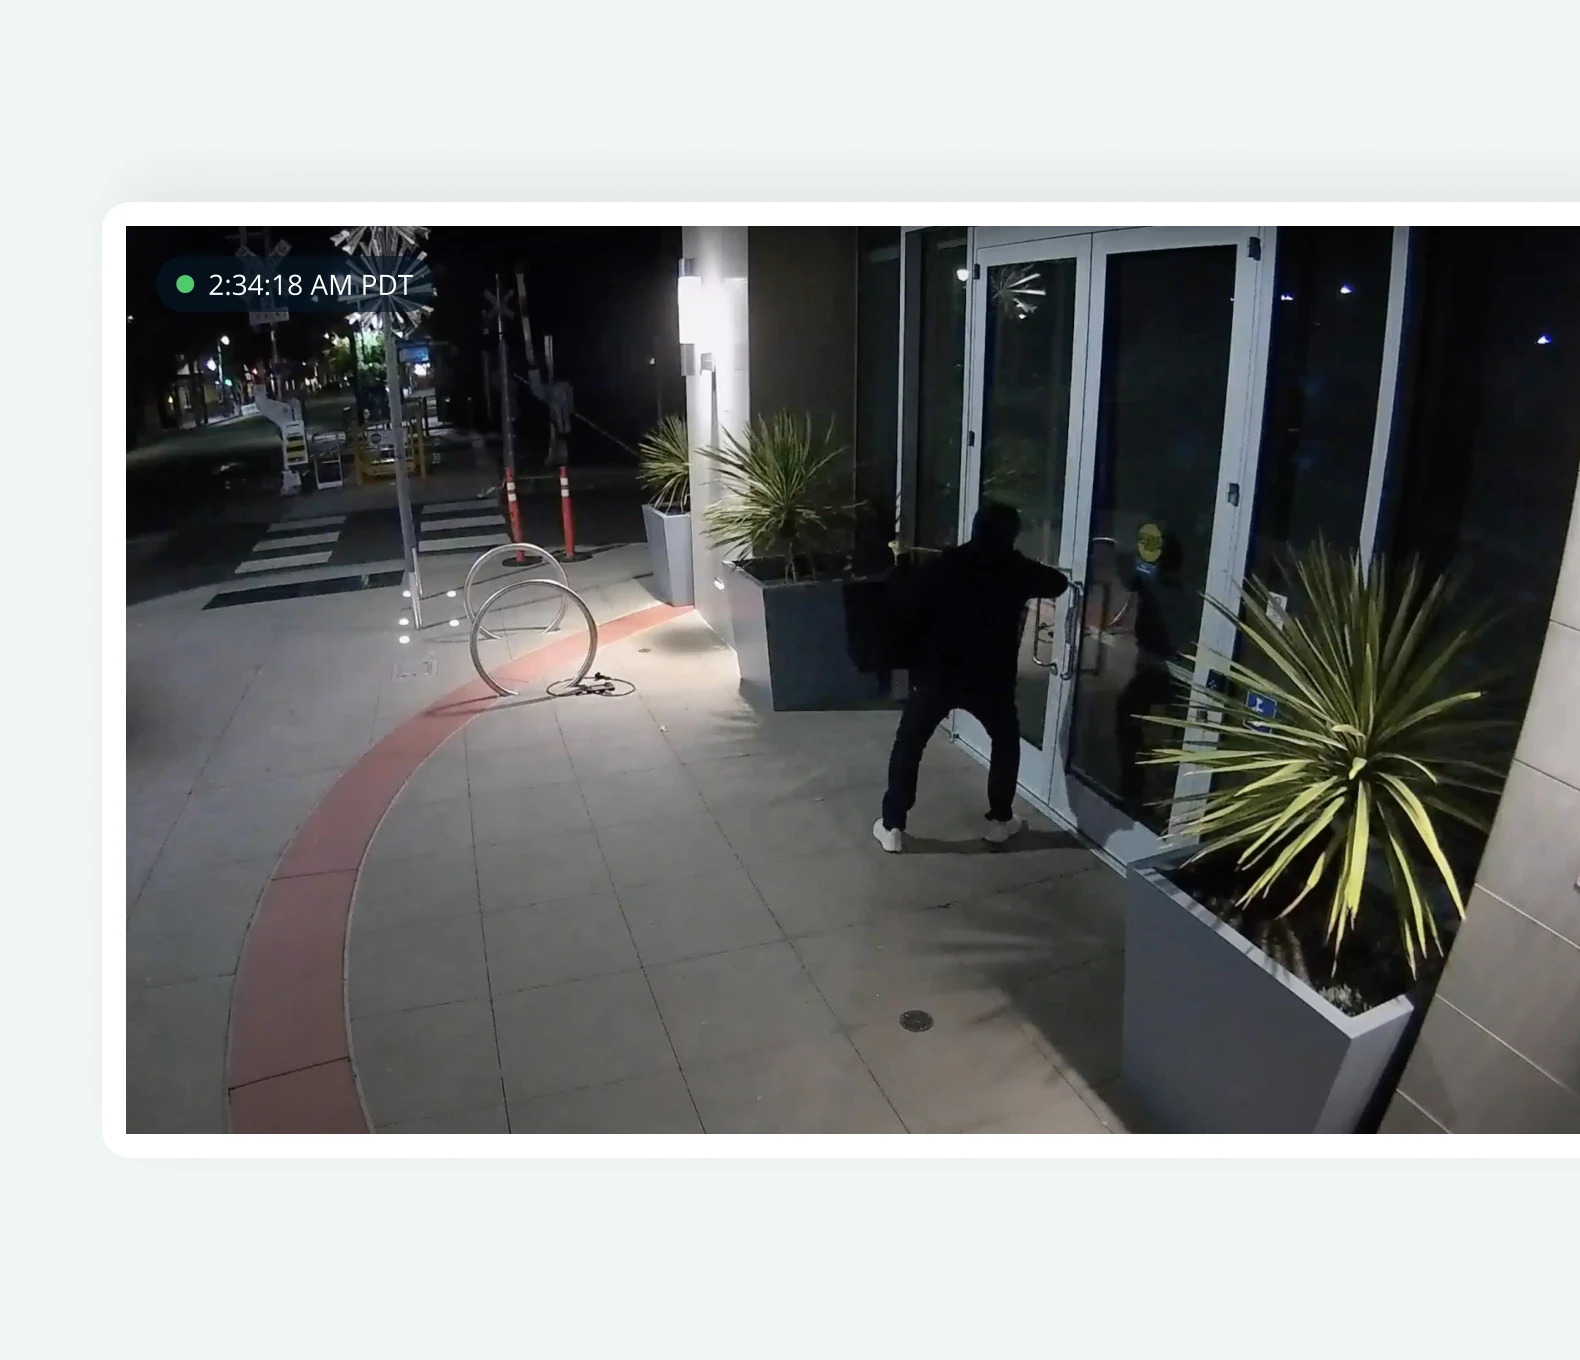 Man breaking into business as captured by video monitoring services